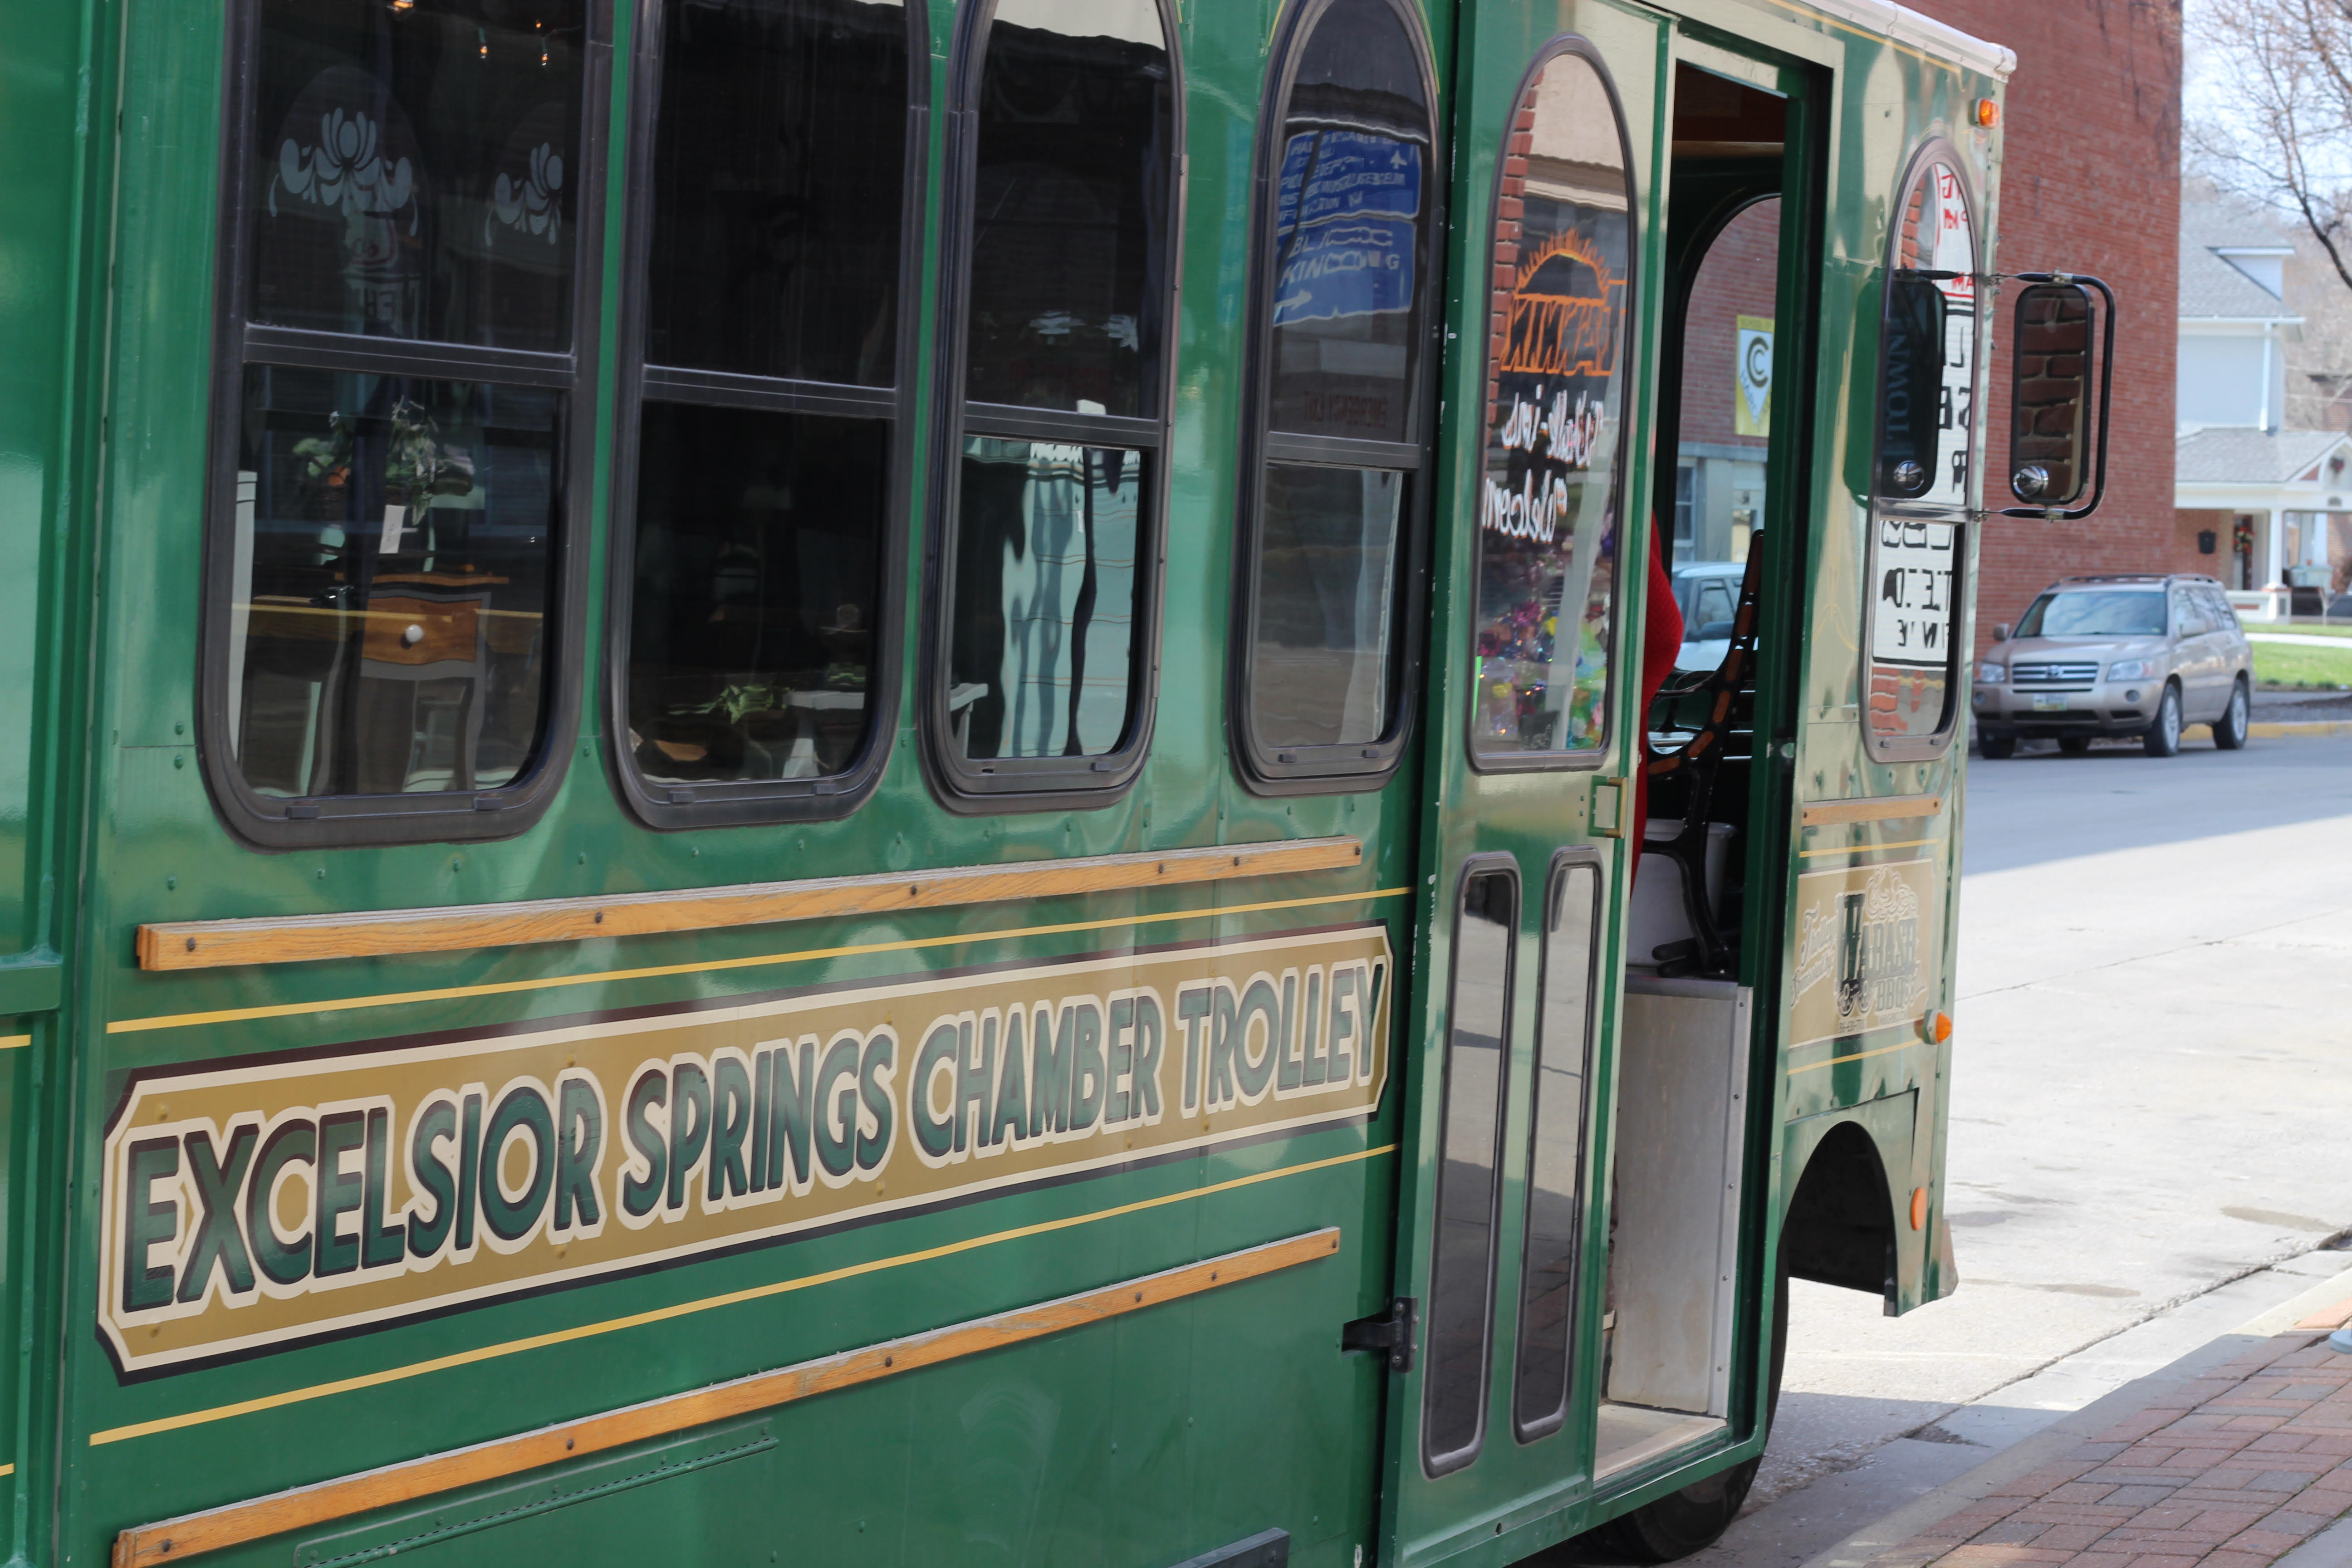 Excelsior Springs green trolley